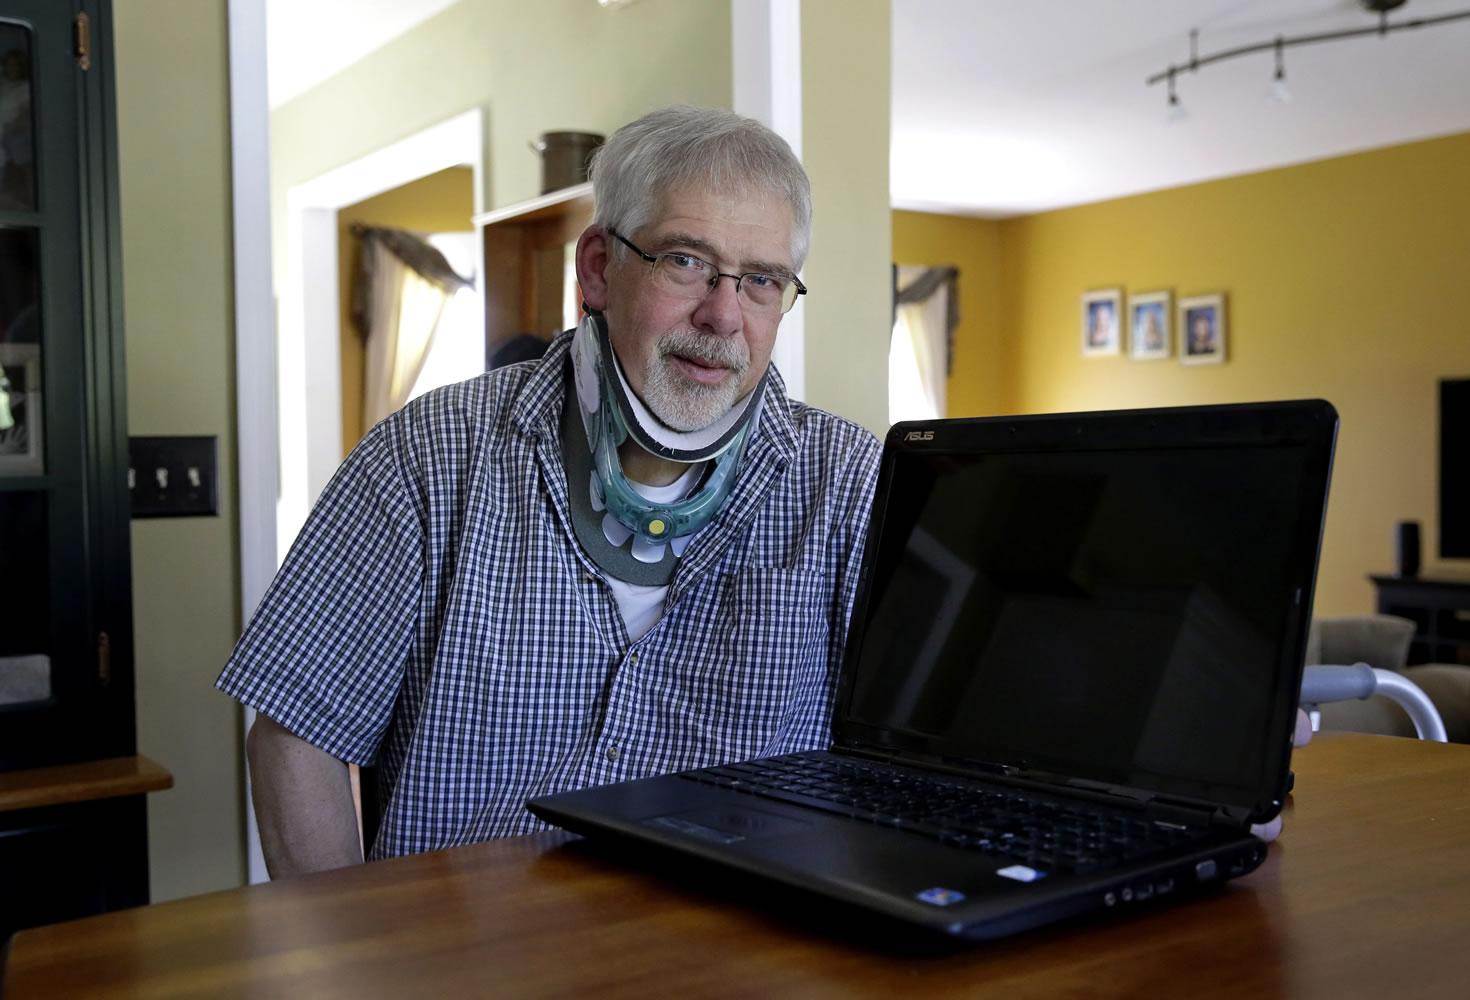 Mark Matulaitis, who has had Parkinson's disease since 2011, uses his laptop computer for virtual house calls with his neurologist from his home in Salisbury, Md.